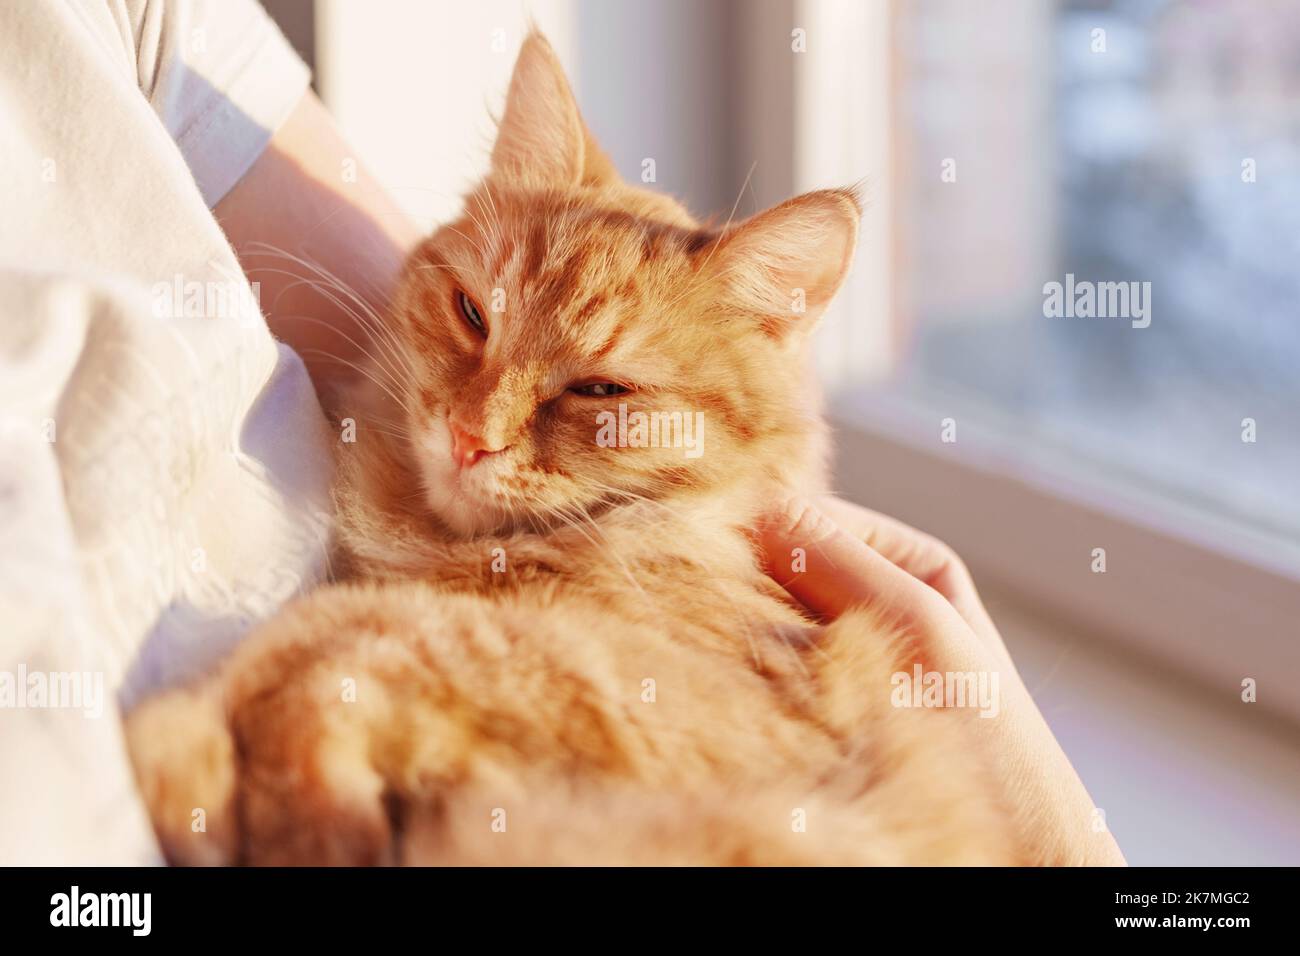 Cute ginger cat is lying on woman's hands and staring at camera. Symbol of fluffy pet adoption. Stock Photo